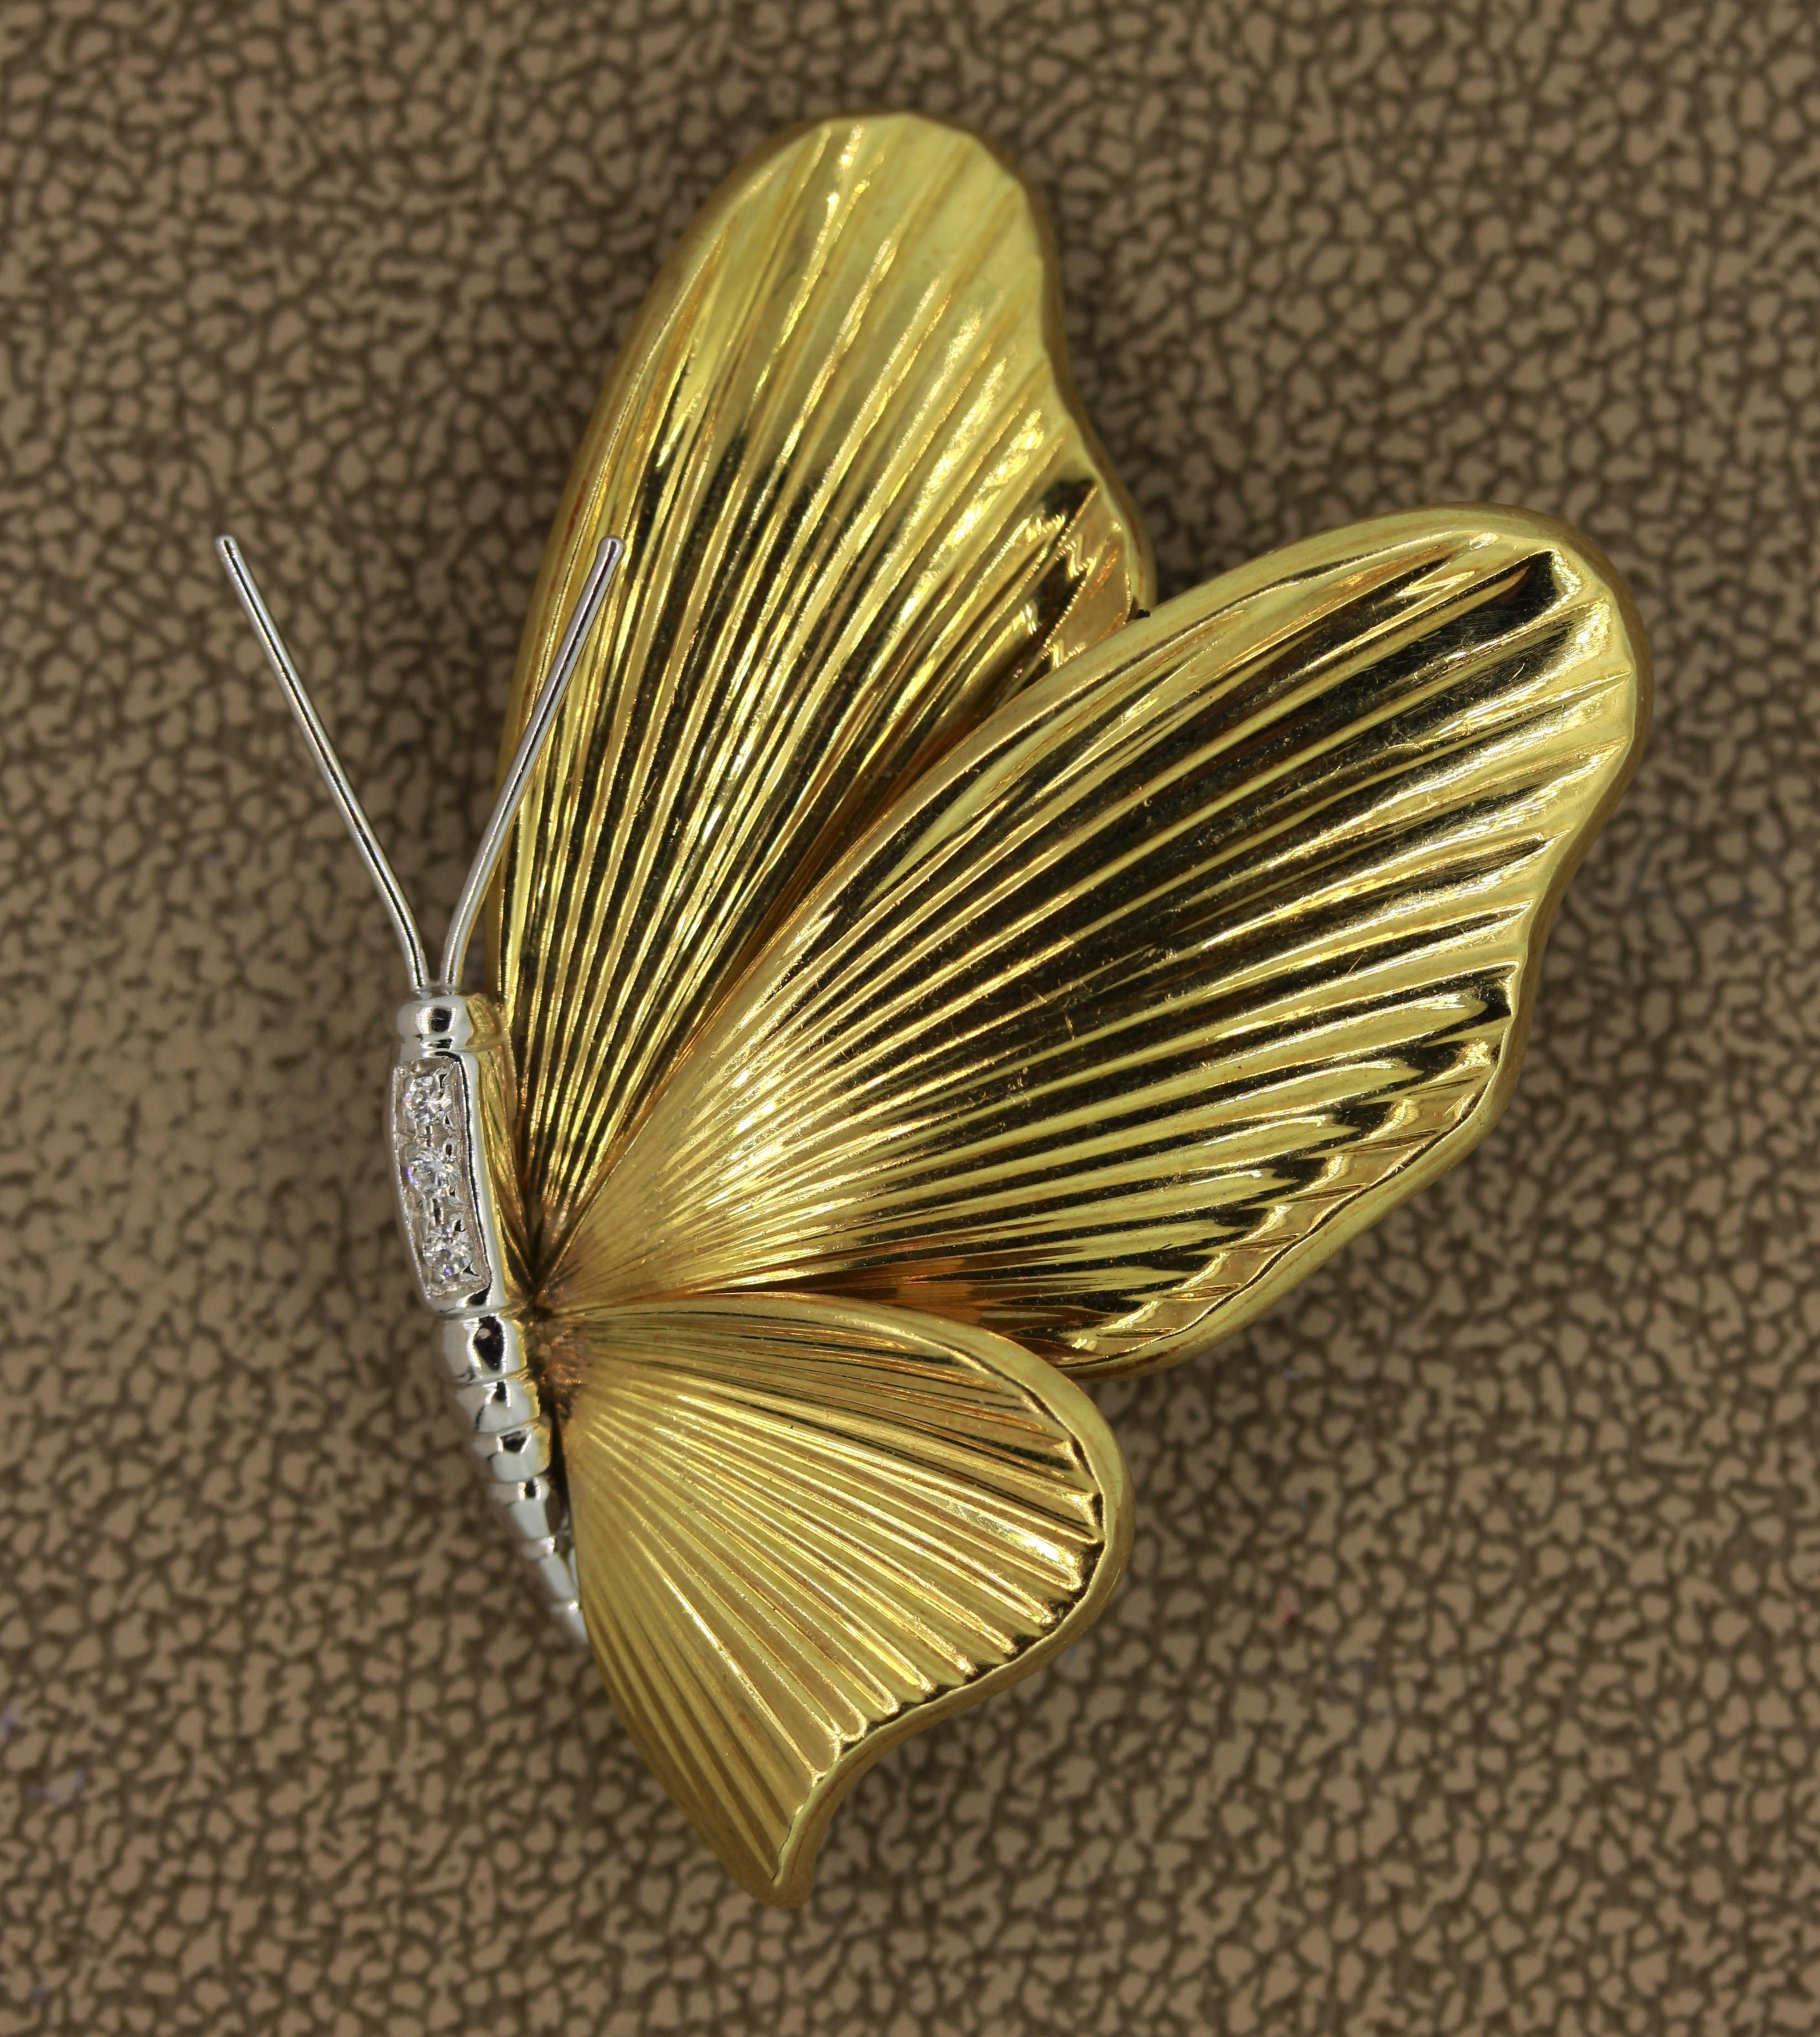 A lovely example of Italian design and craftsmanship. This cute lifelike brooch is made of 18k white and yellow gold and is set with 3 round brilliant cut diamonds. A great addition to any outfit.

Length: 1.9 inches